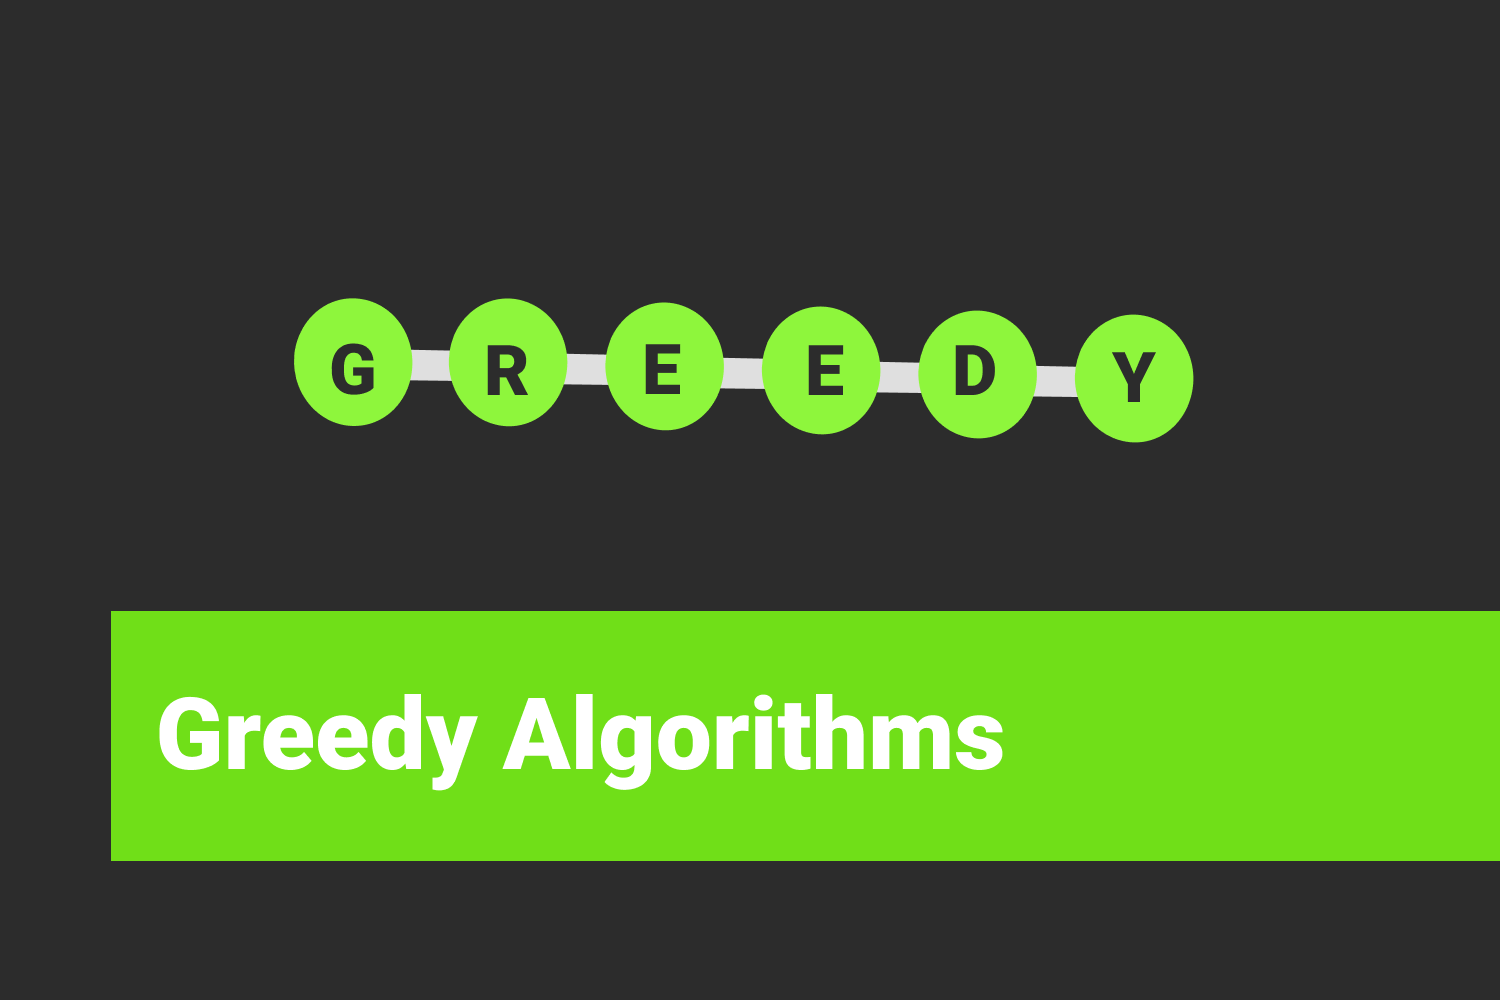 What are Greedy Algorithms?